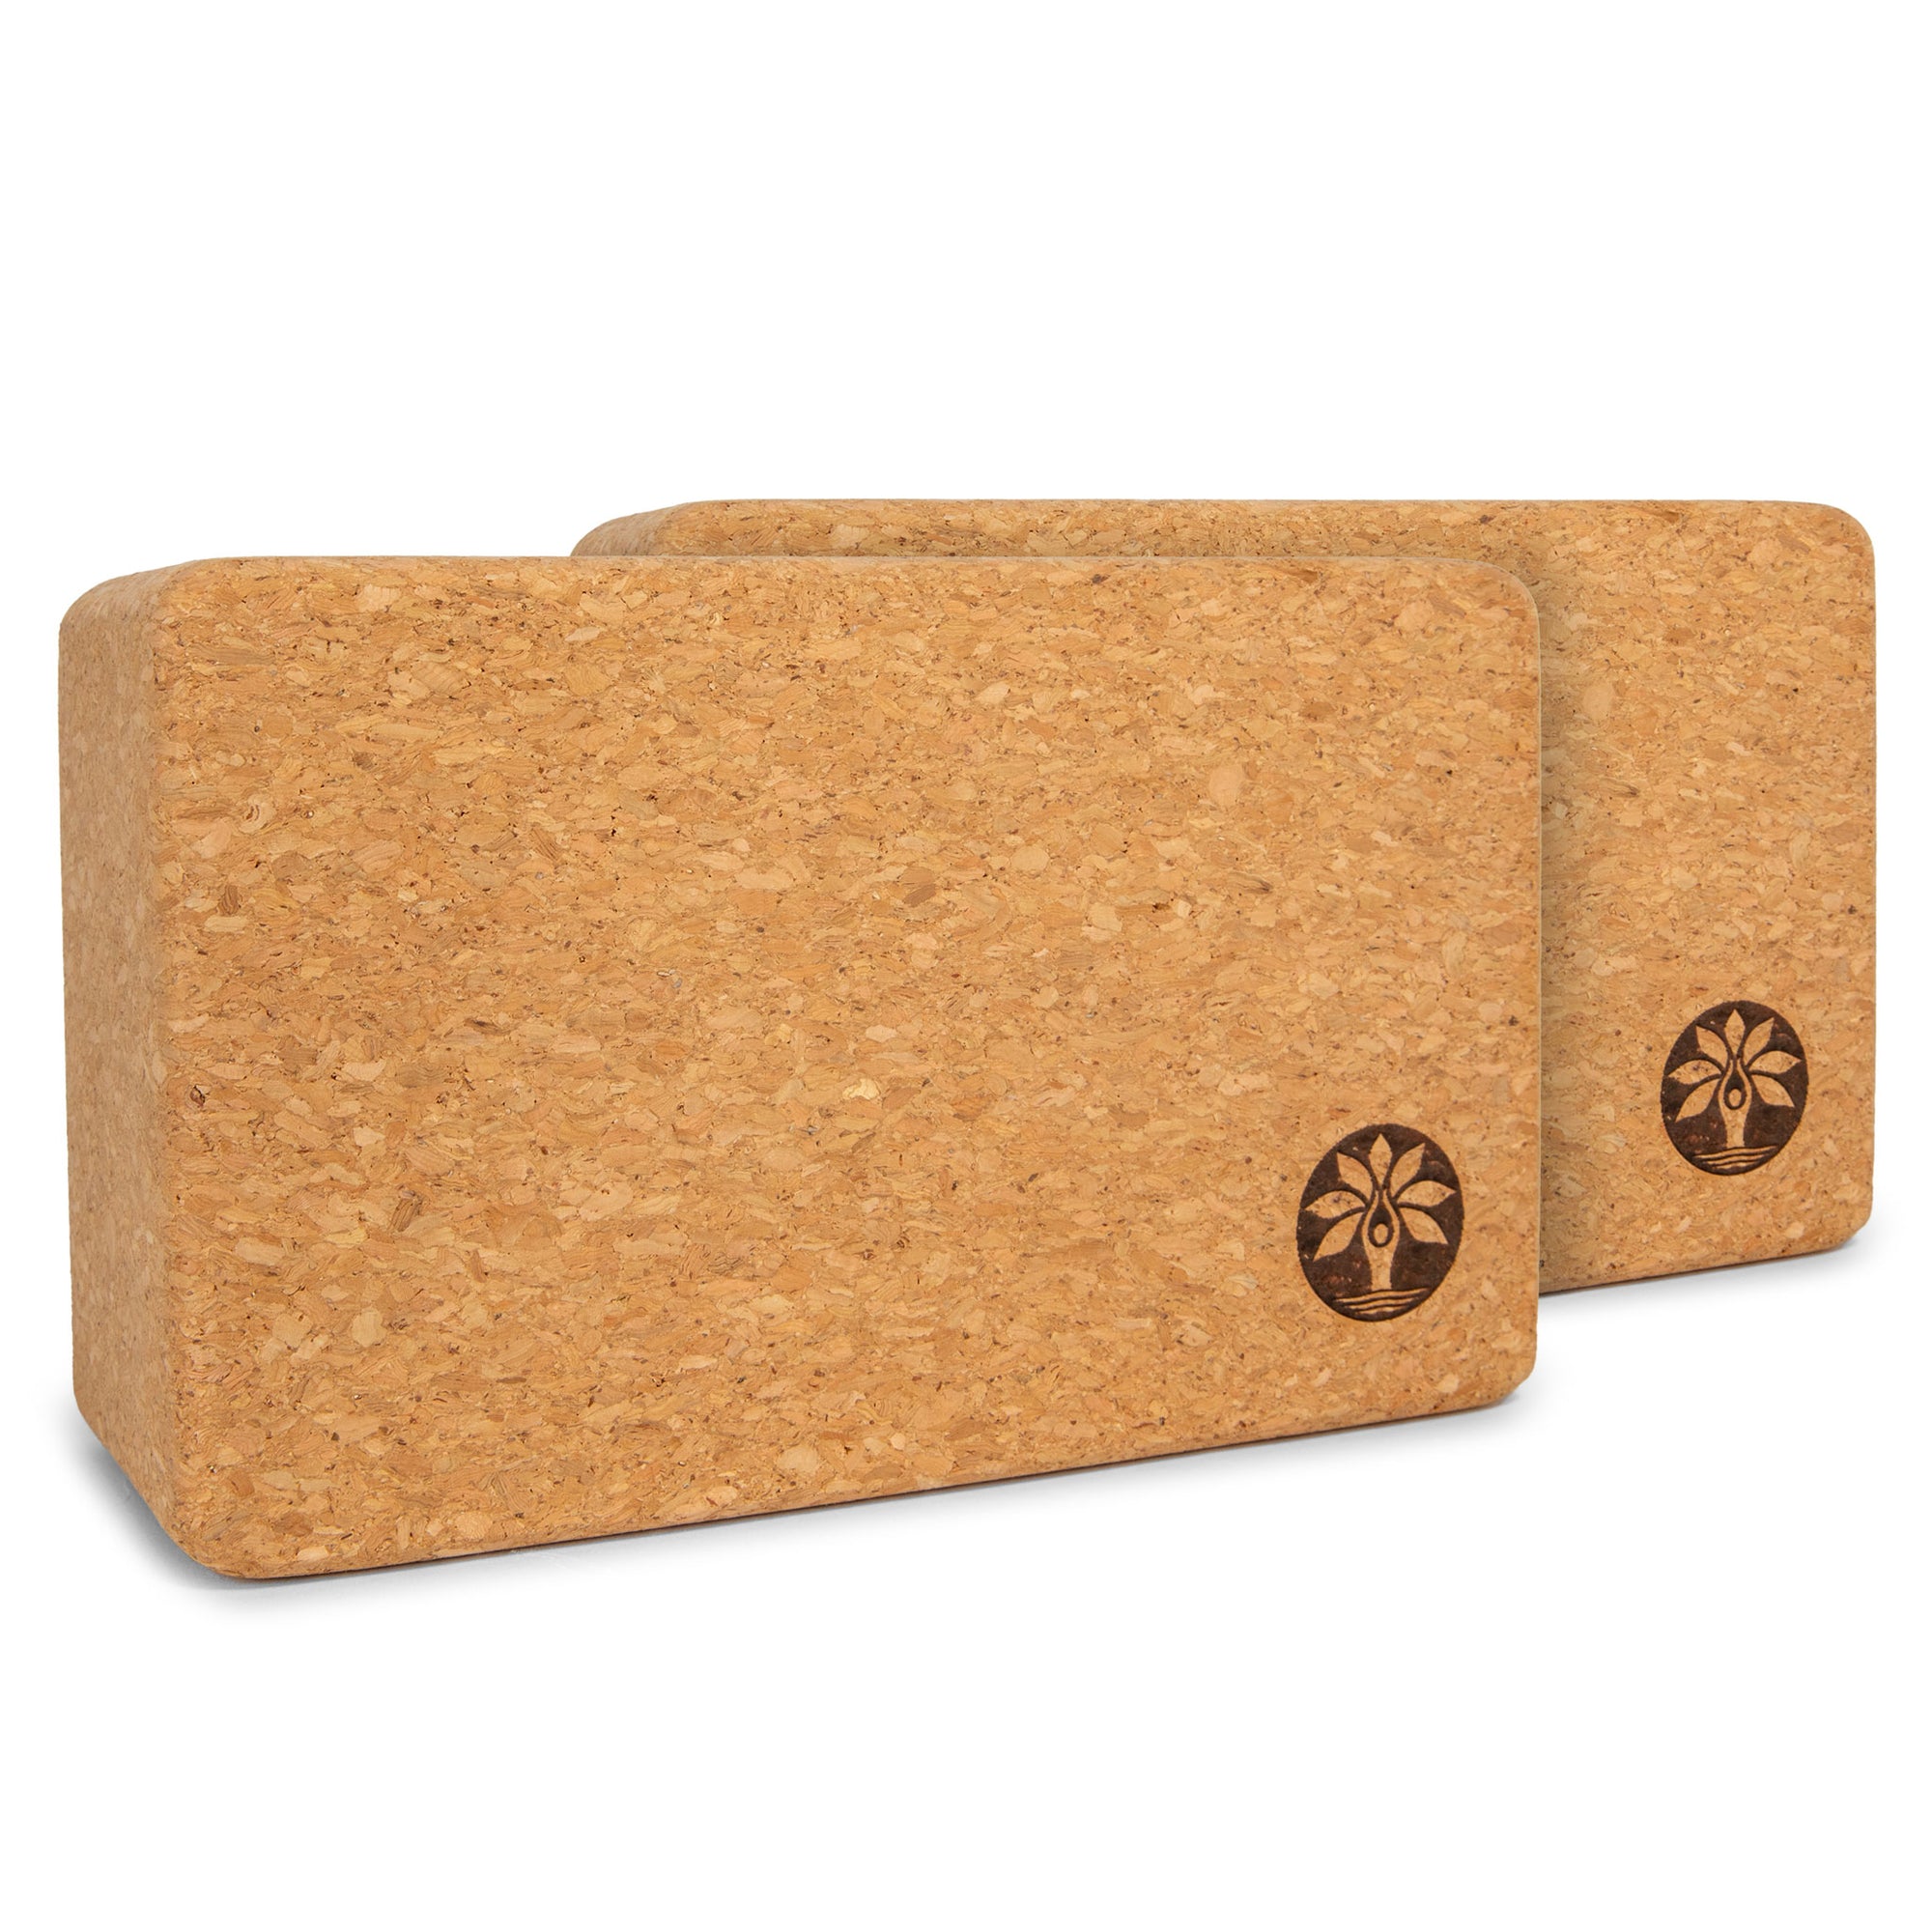 Care Feathers™ Cork and Rubber Mat – Care Feathers Inc.